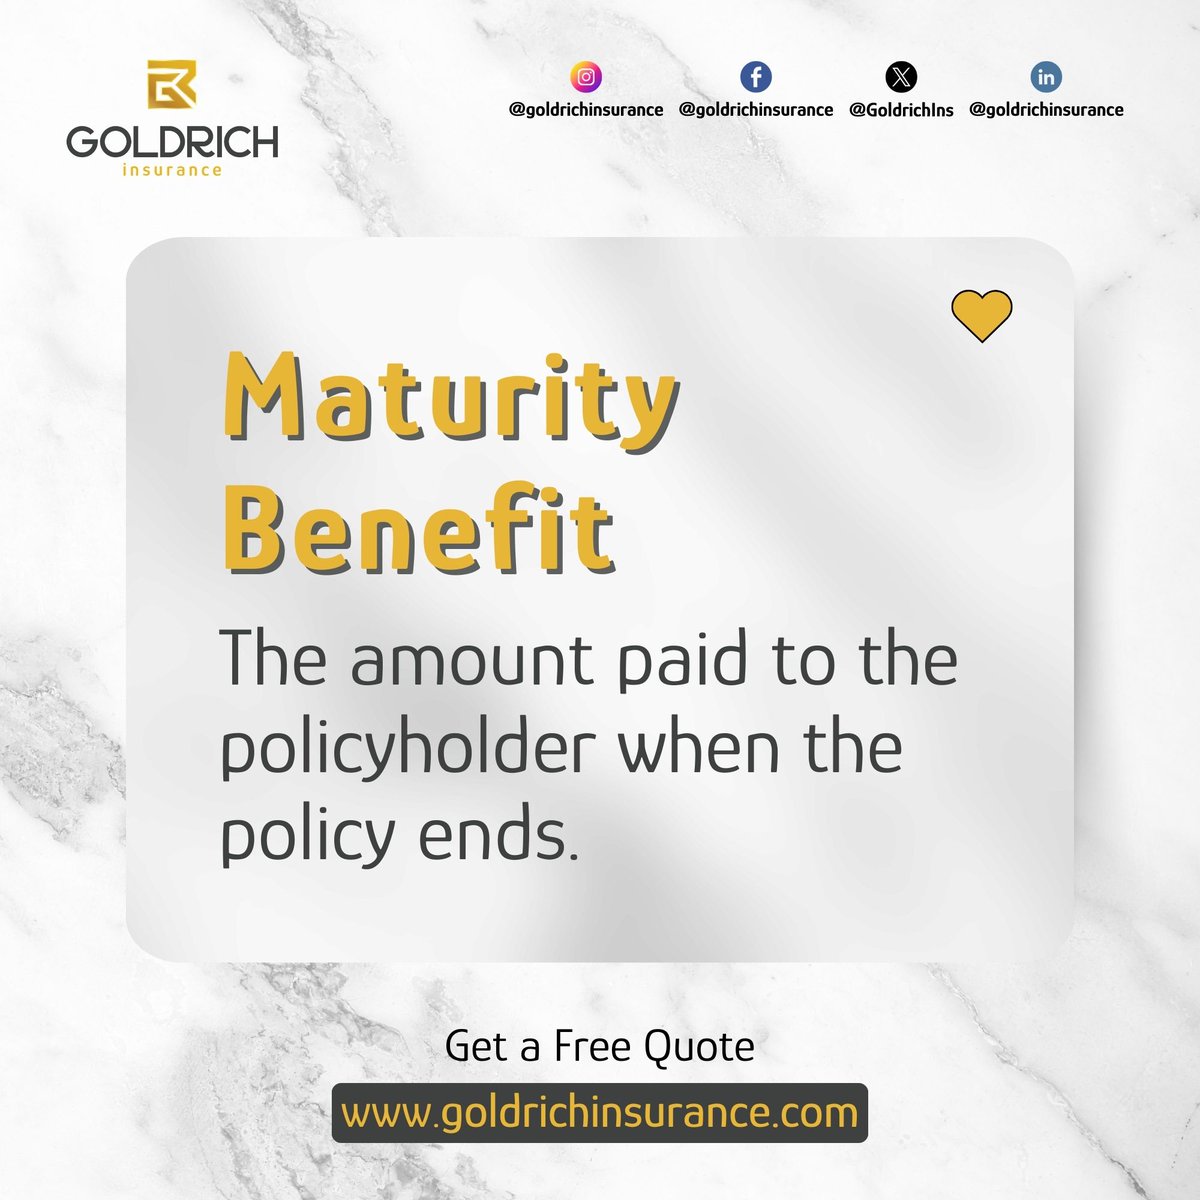 𝗠𝗮𝘁𝘂𝗿𝗶𝘁𝘆 𝗕𝗲𝗻𝗲𝗳𝗶𝘁:
The amount paid to the policyholder when the policy ends.

Get Your Free Quote: goldrichinsurance.com

#insurance #lifeinsurance #insuranceagent #insurancebroker #healthinsurance #business #investment #finance